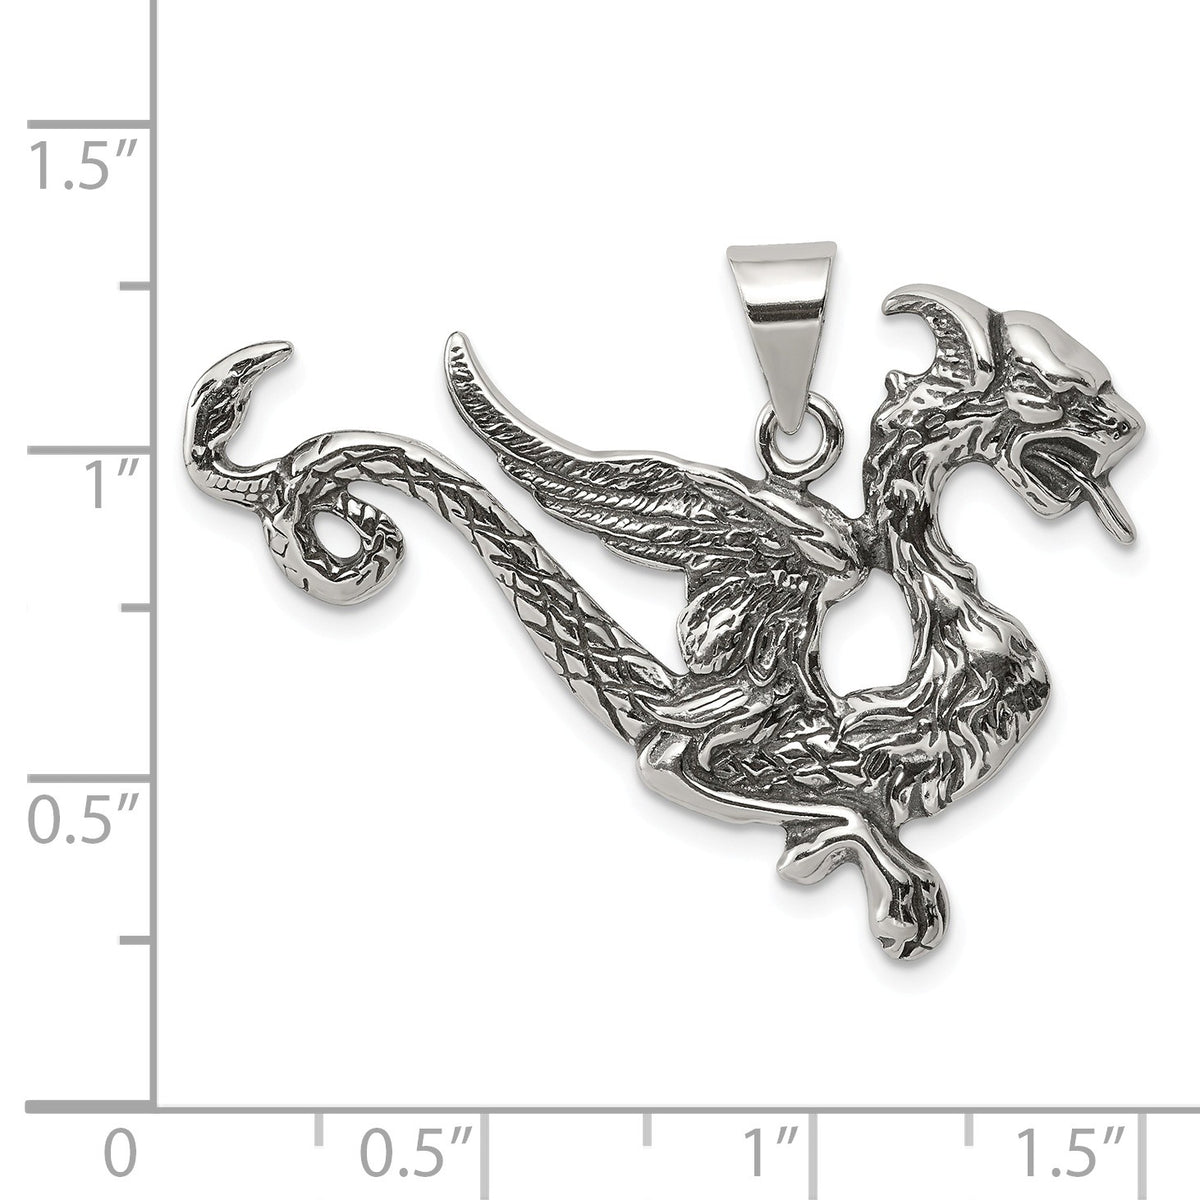 Alternate view of the Sterling Silver Large 37mm Antiqued Dragon Pendant by The Black Bow Jewelry Co.